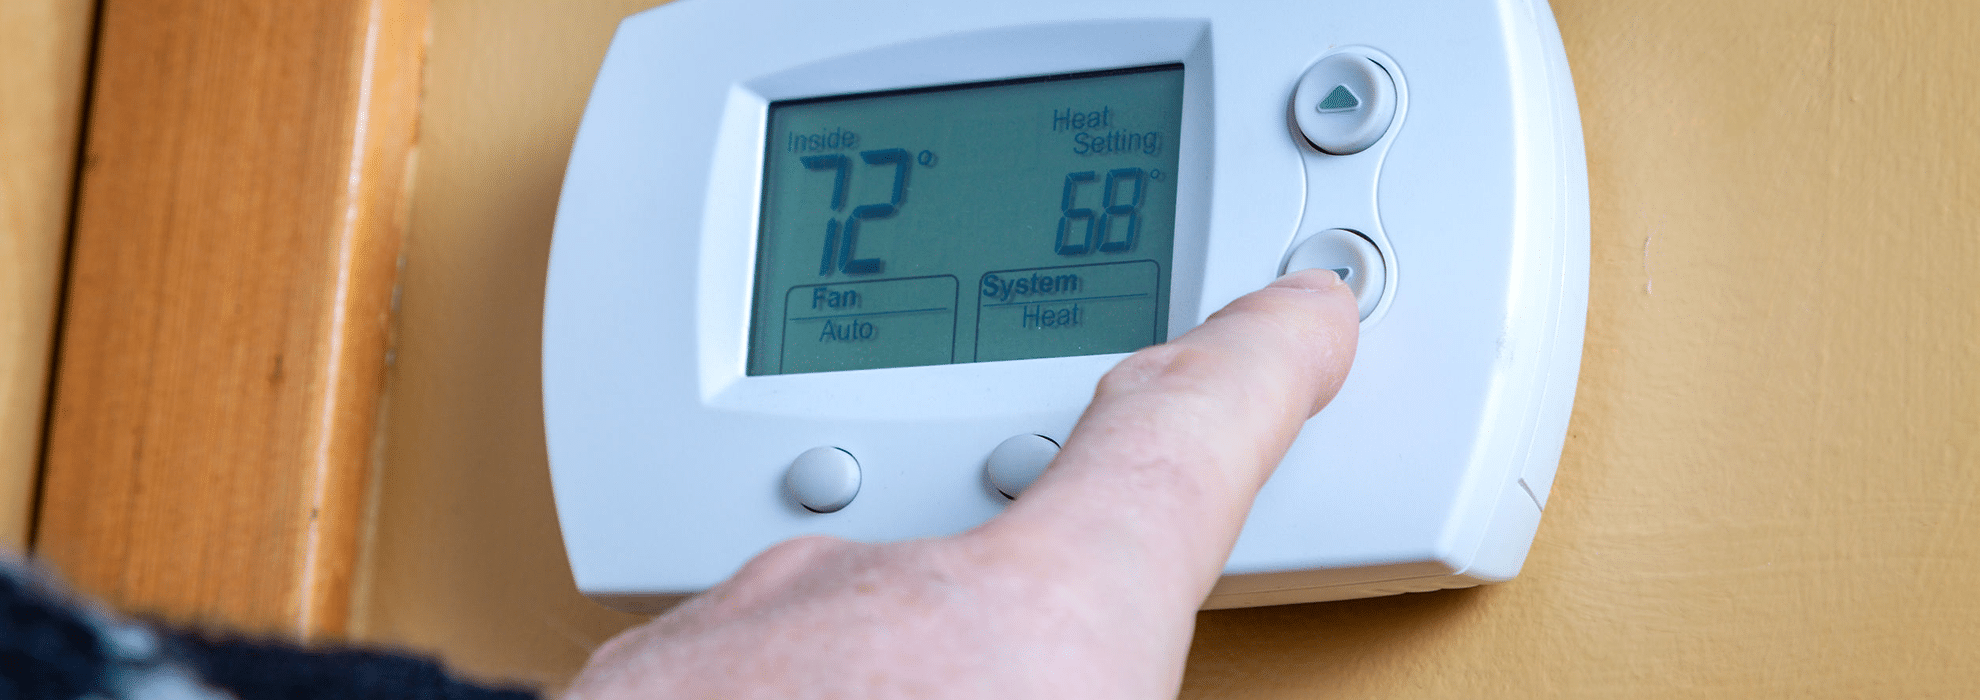 On vs. Auto: Which Thermostat Setting Is Better? - Pasco, WA